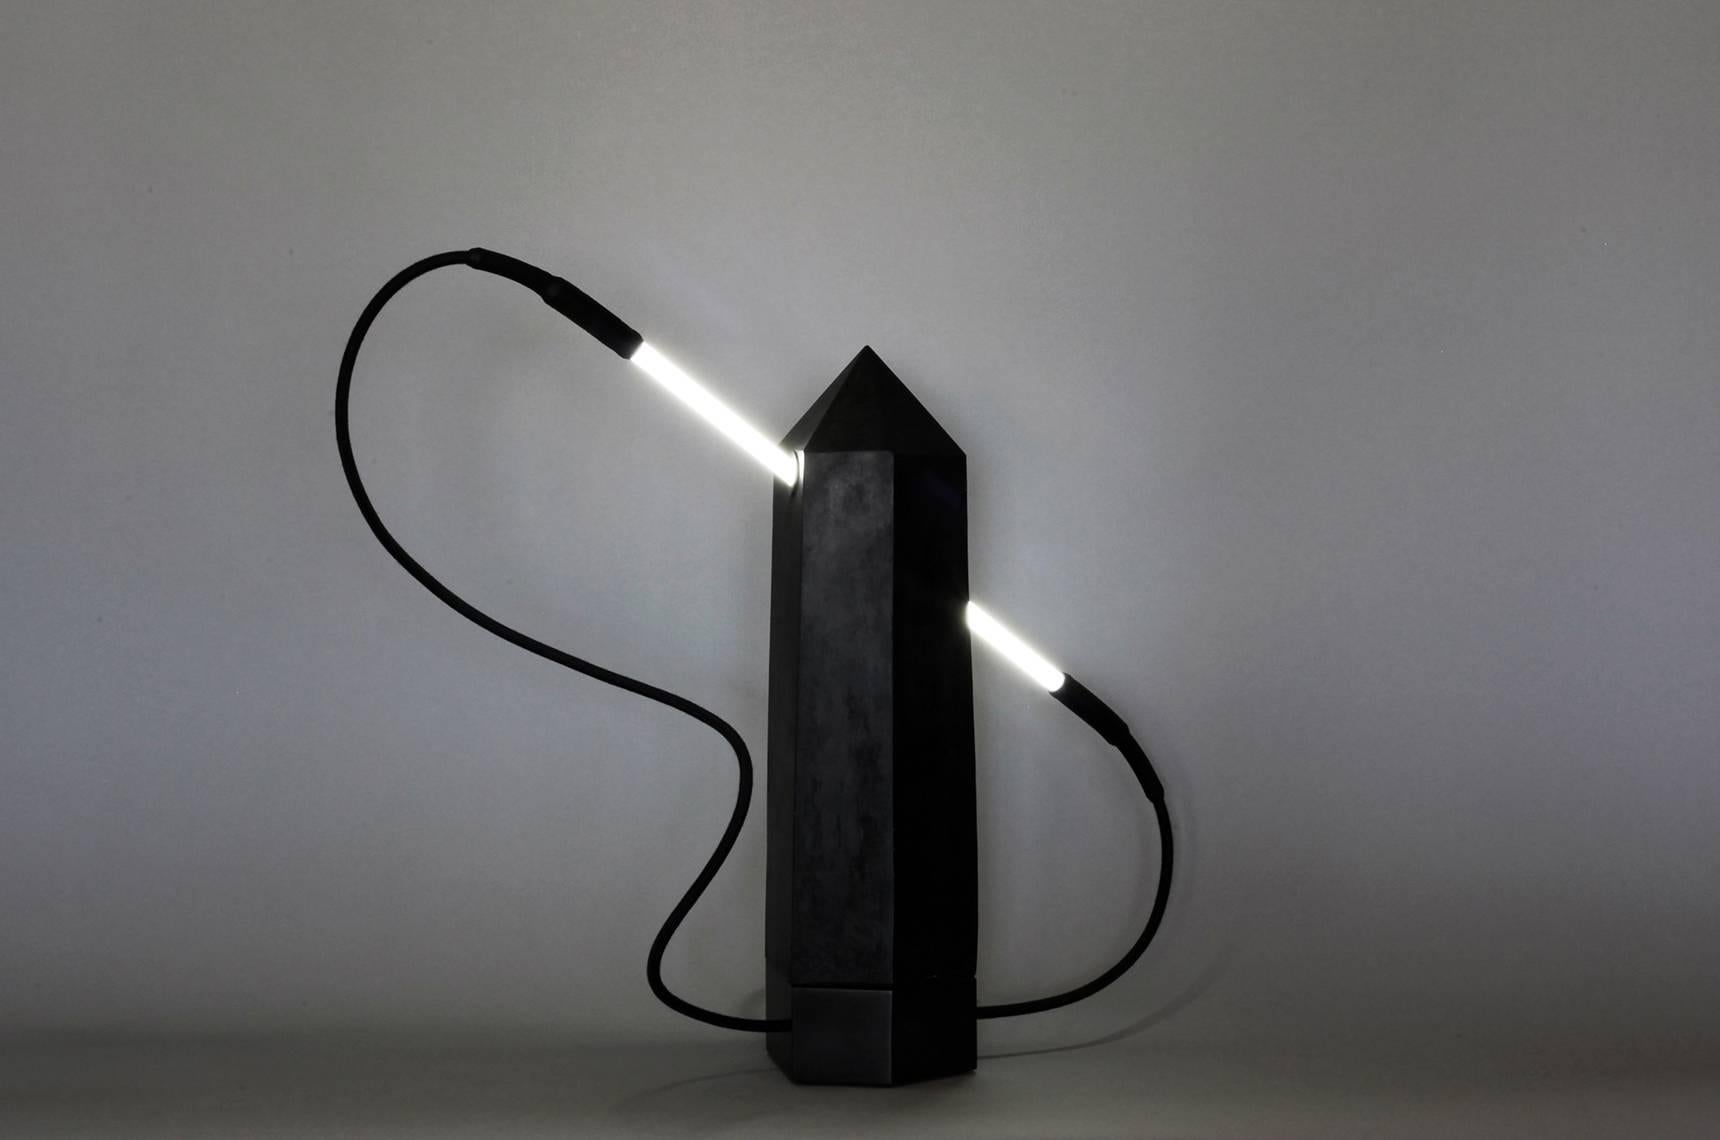 A study of Brutalist architecture in combination with natural elements.
Shungite absorbs electromagnetic energy and by being pierced with healing white light in the form of neon, intersection becomes a study of positive and negative space.
“Shungite